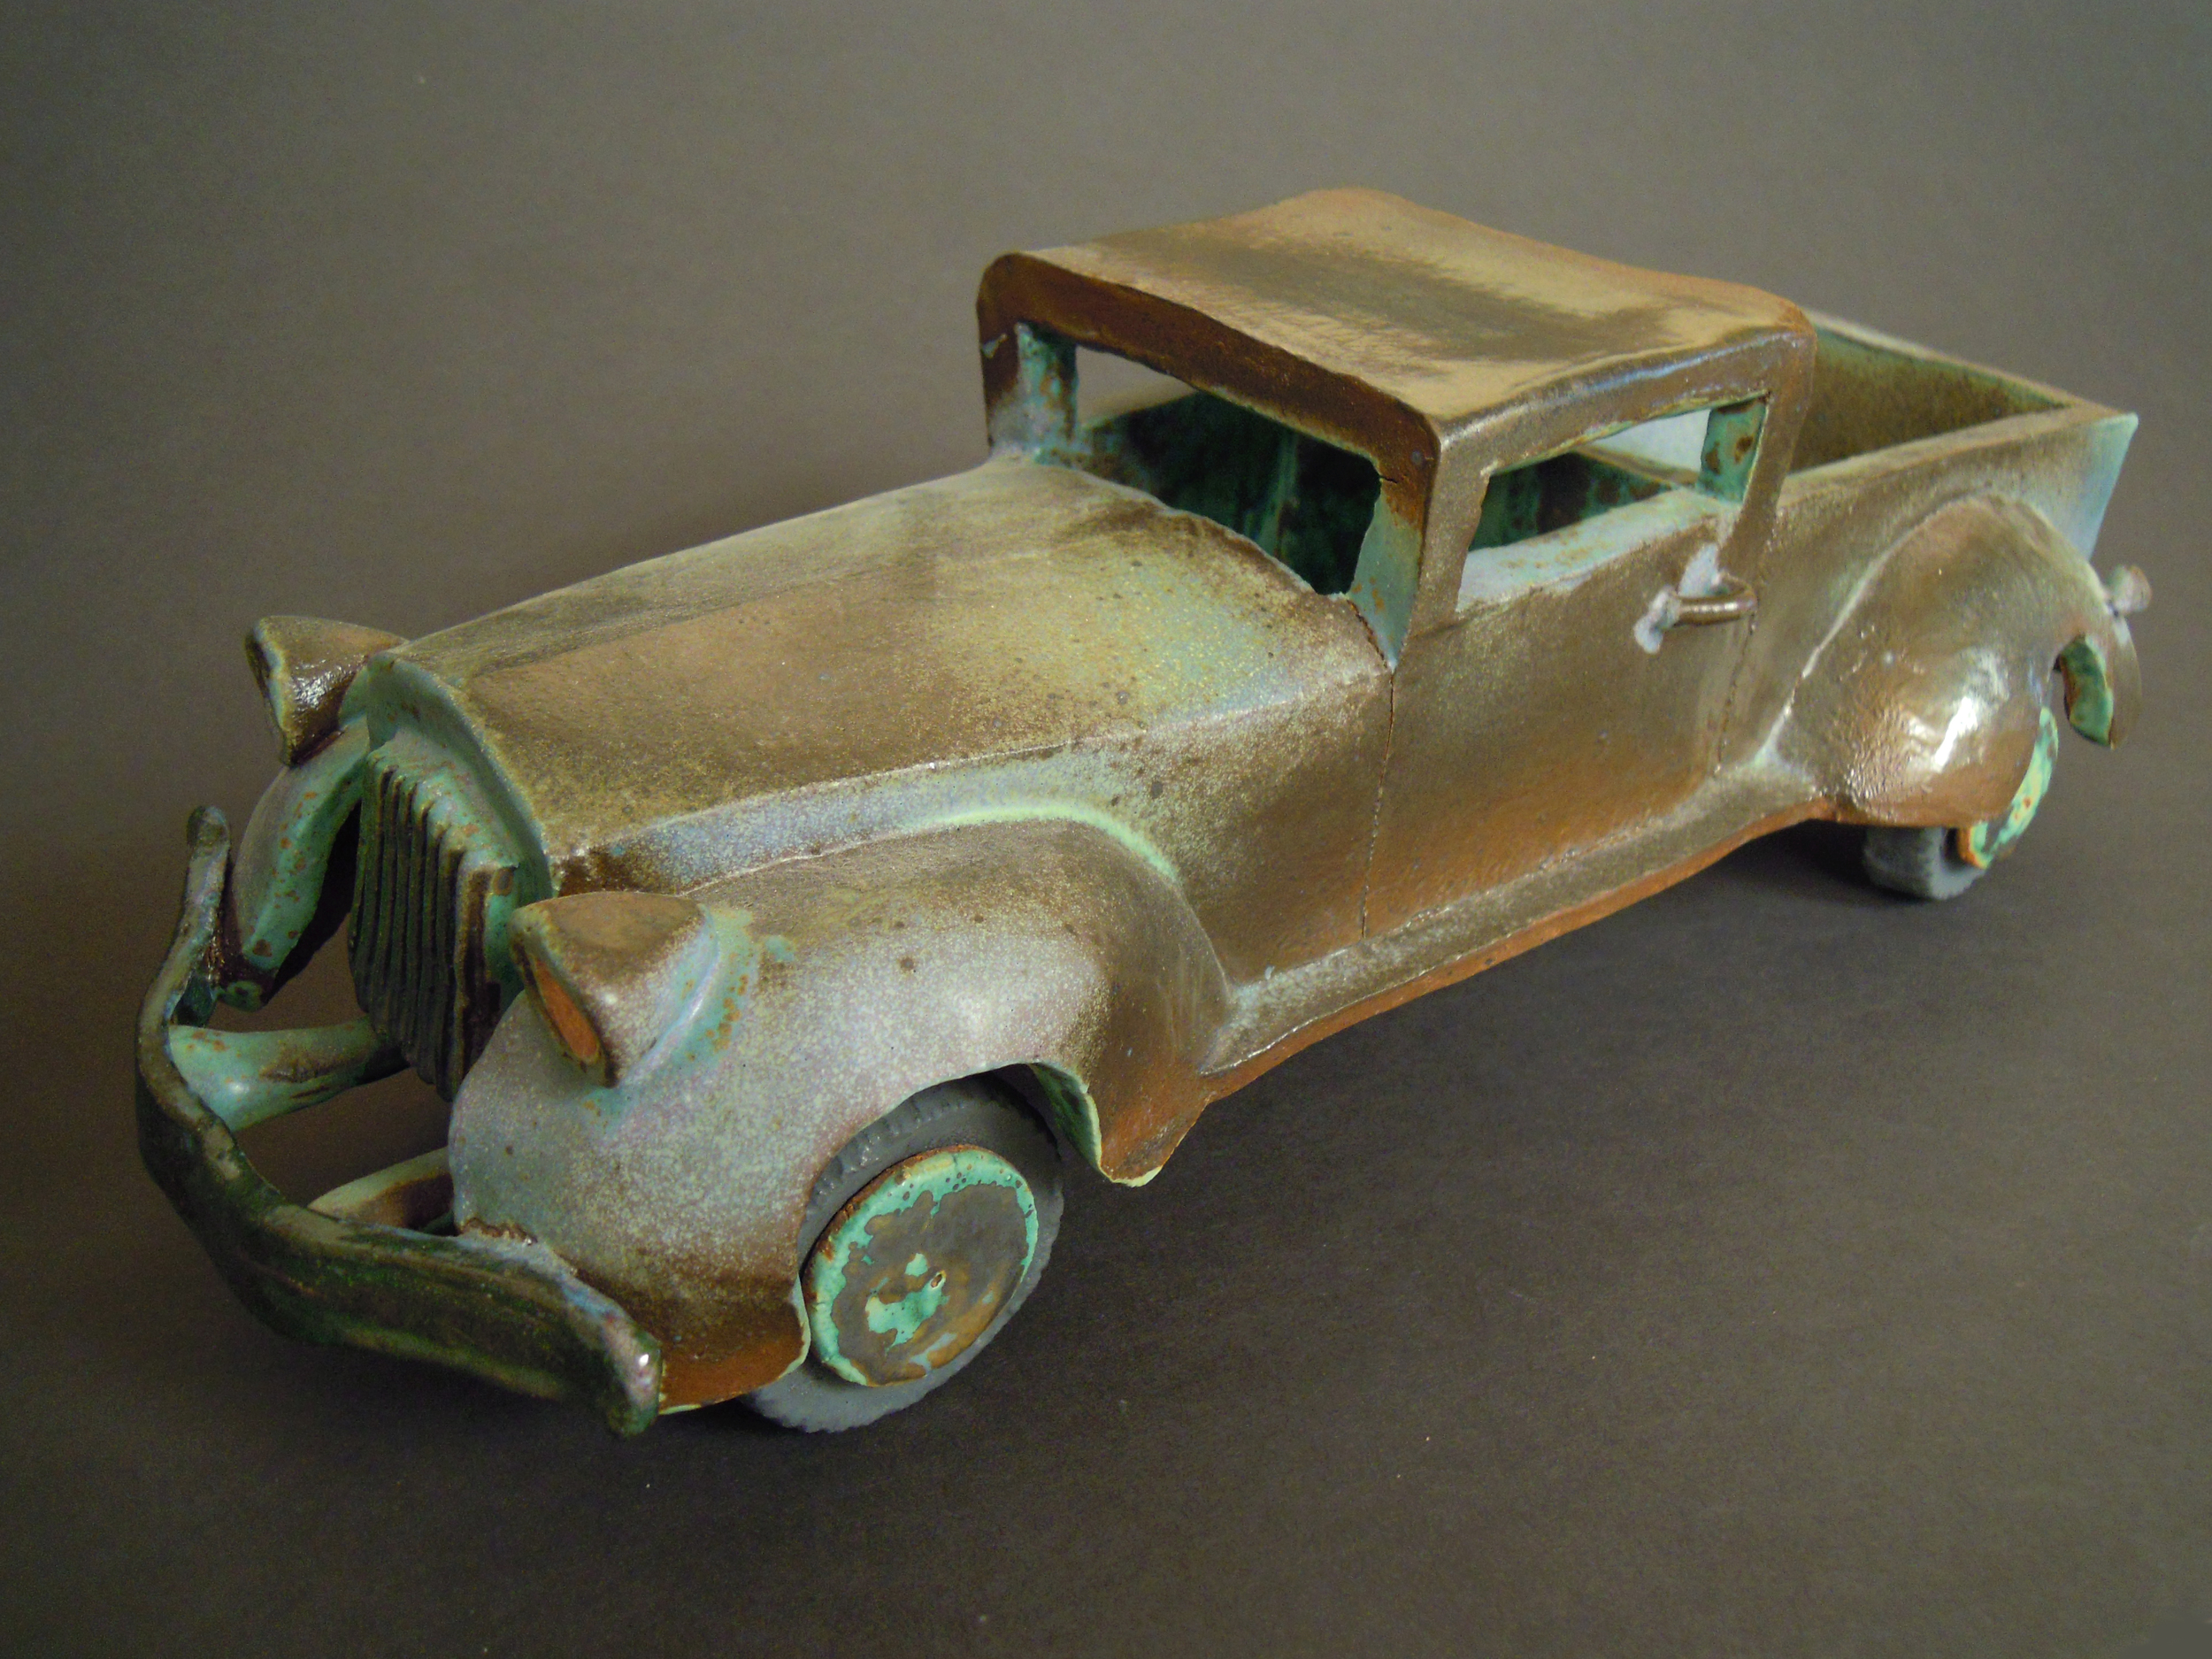  1930's Ford Truck, 2010. The first vehicle, glazed in Val Cushing green and blue. Feels like its been in the desert too long, perhaps it was in the kiln too long 